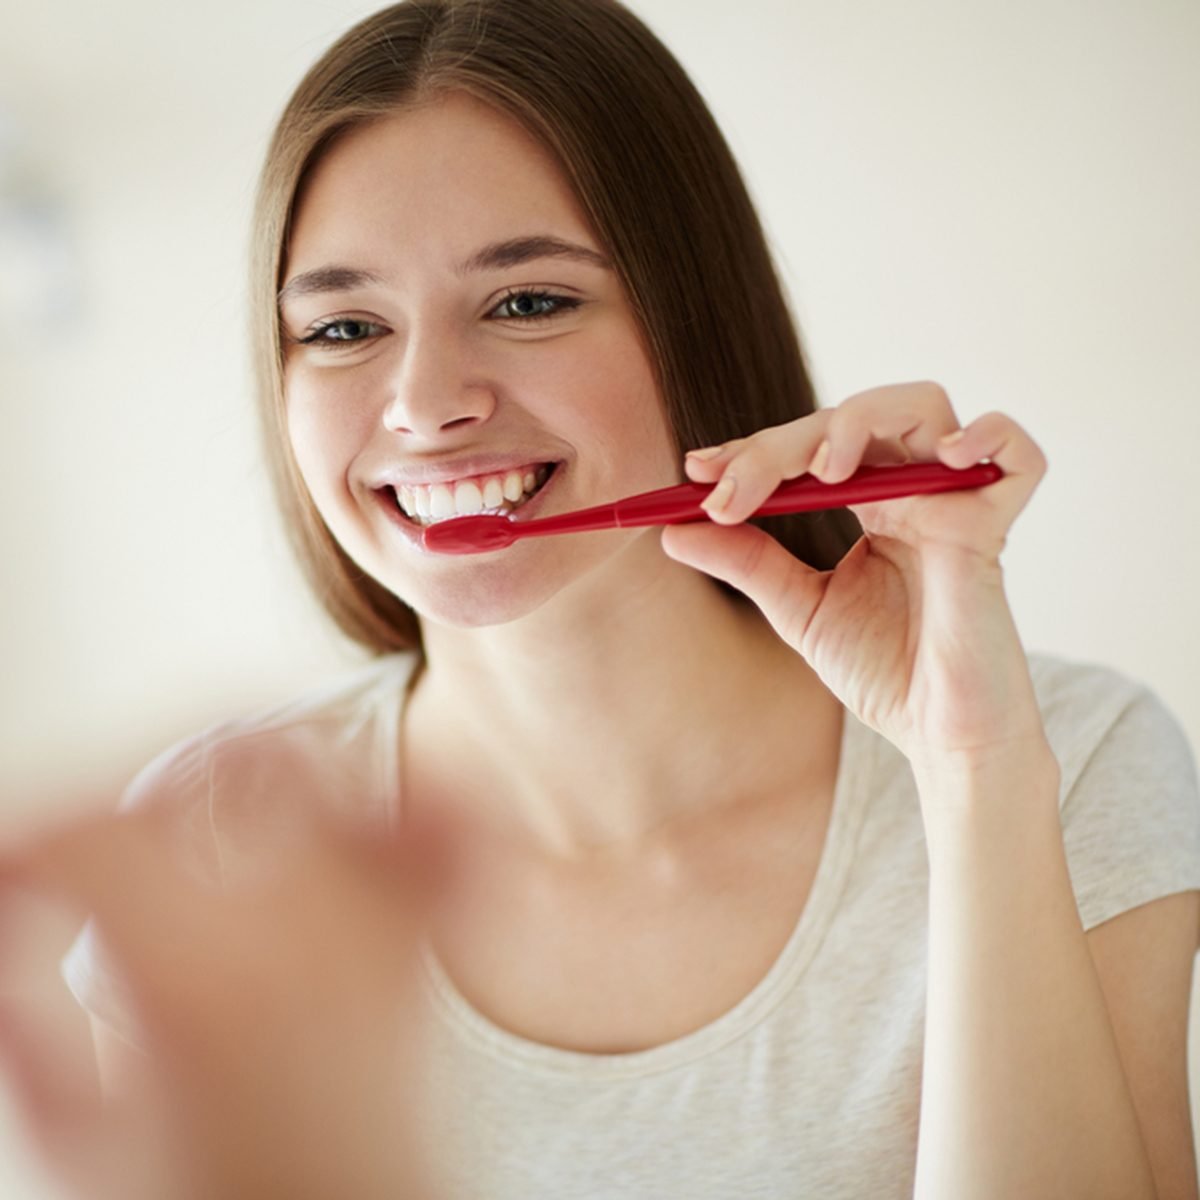 Young woman brushing her teeth at mirror